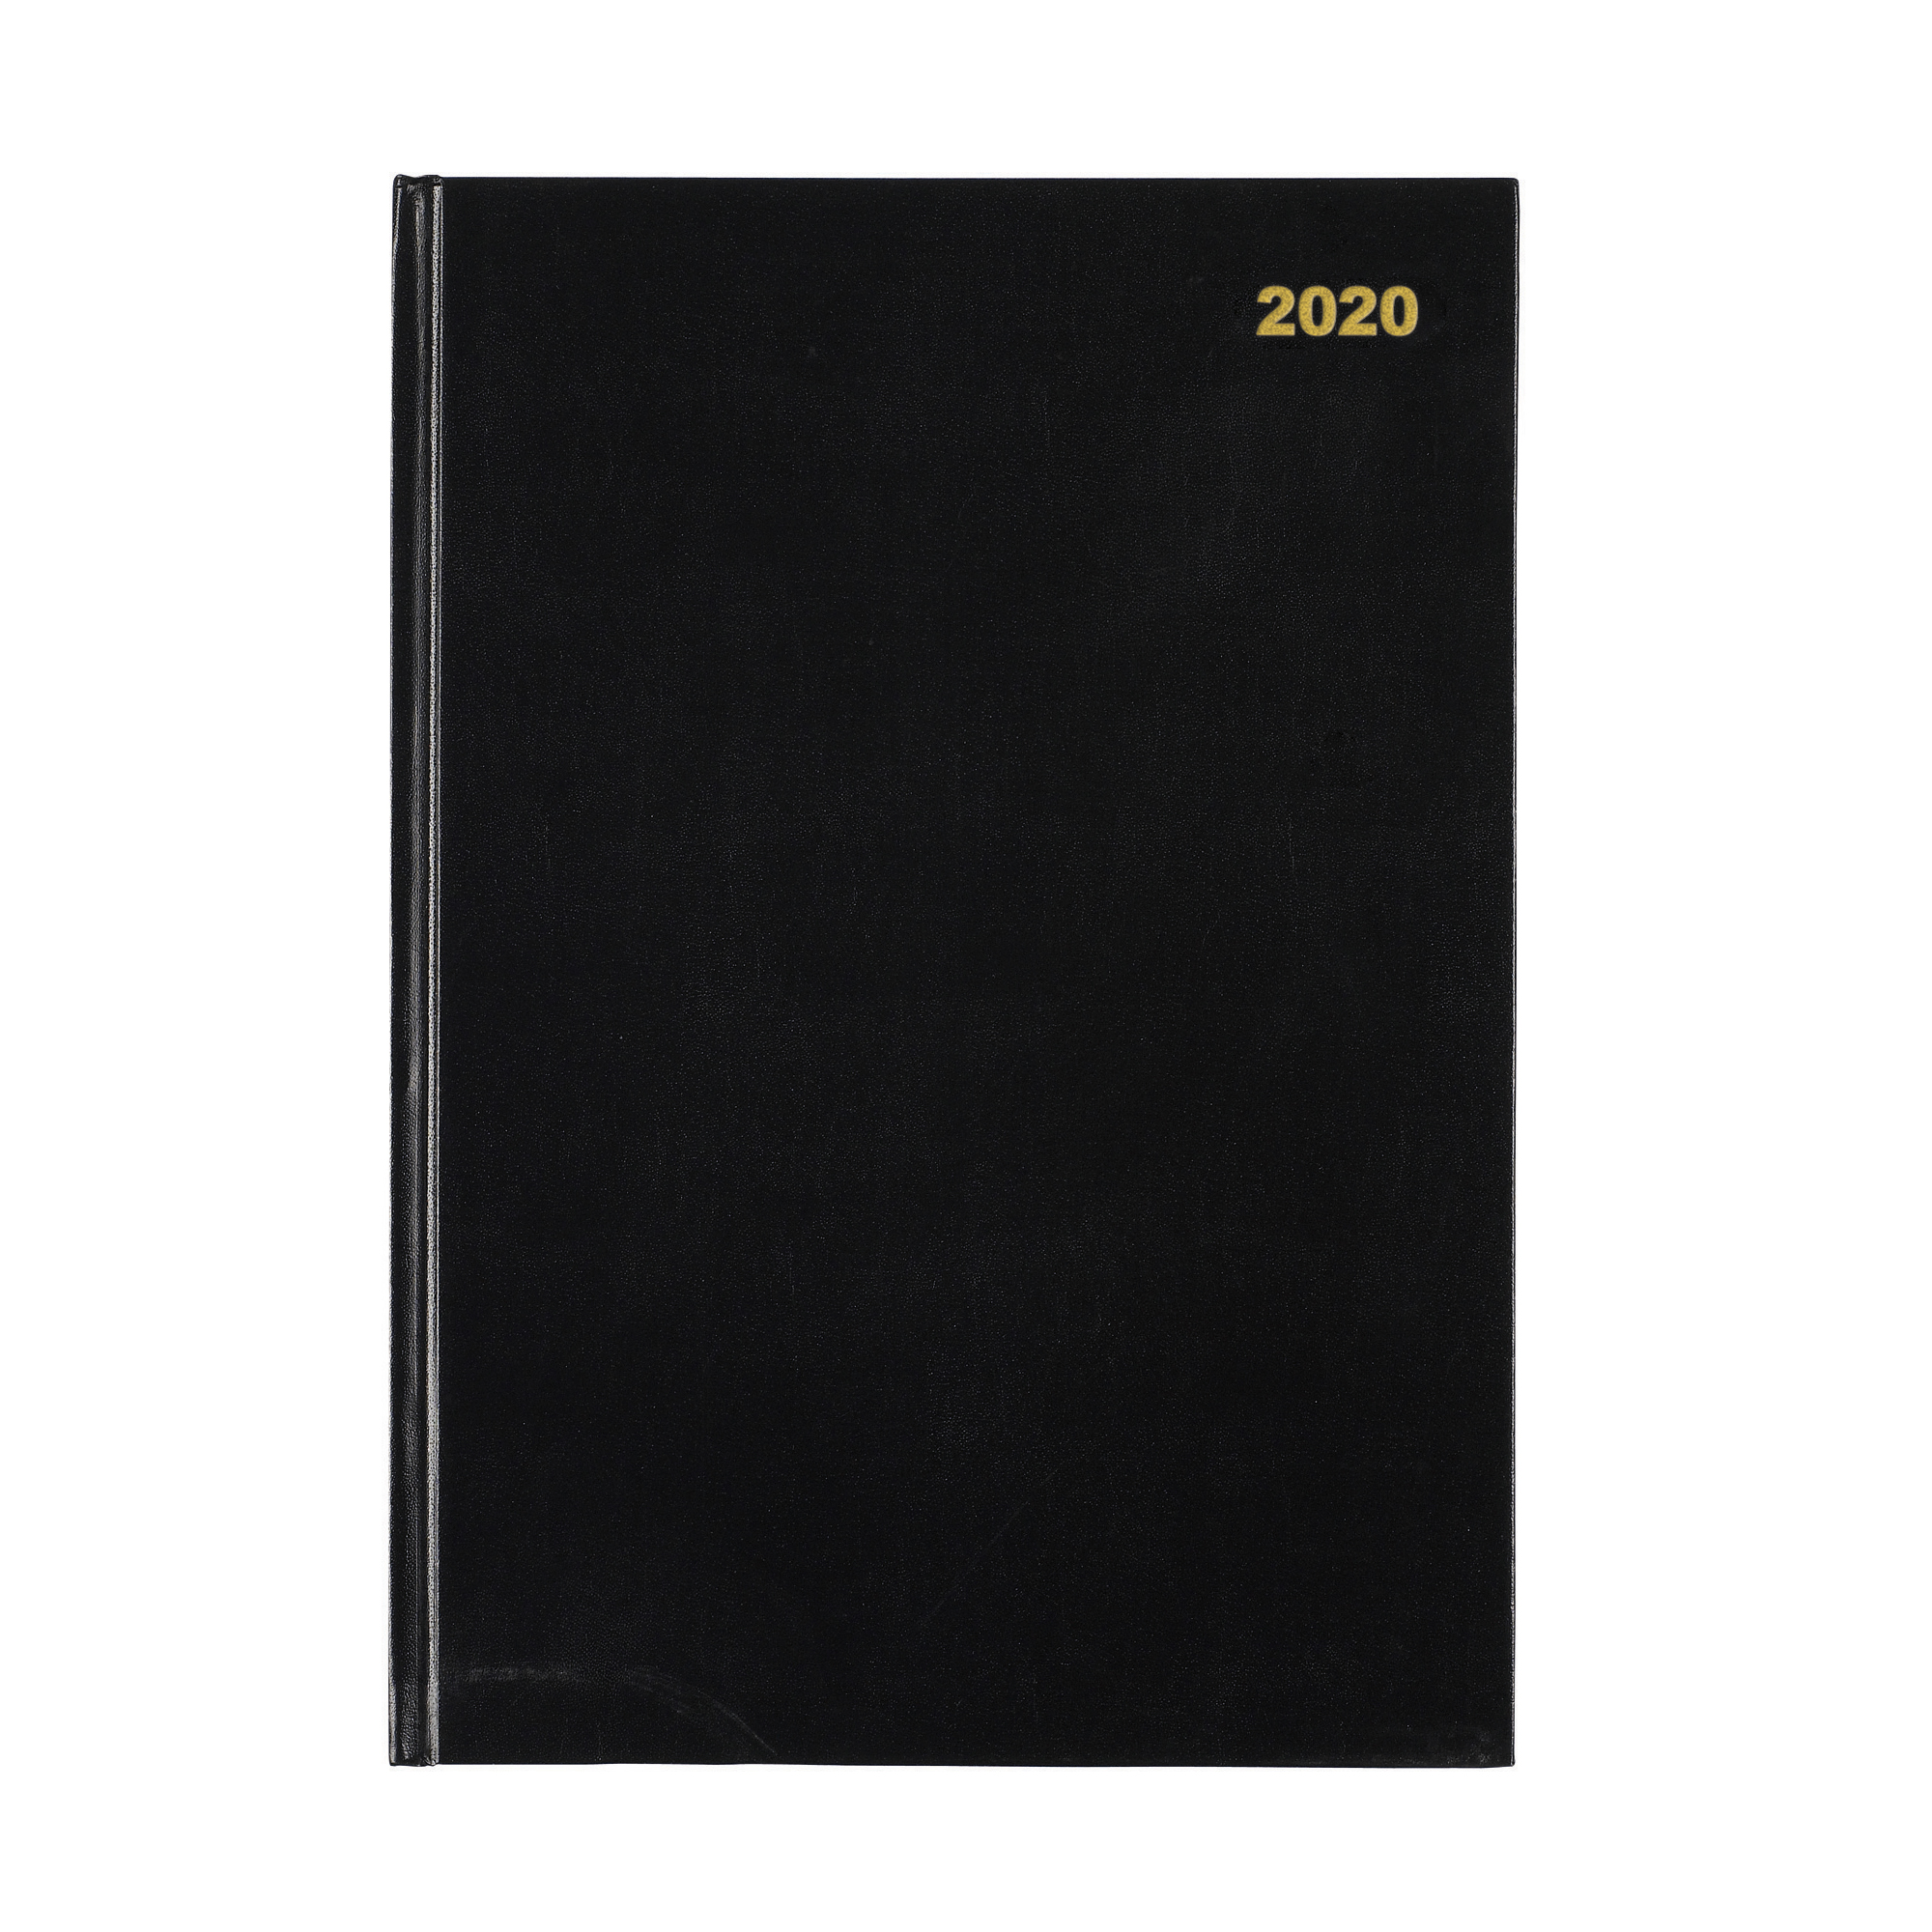 5 STAR 2020 A4 2 PAGES PER DAY DIARY BLK